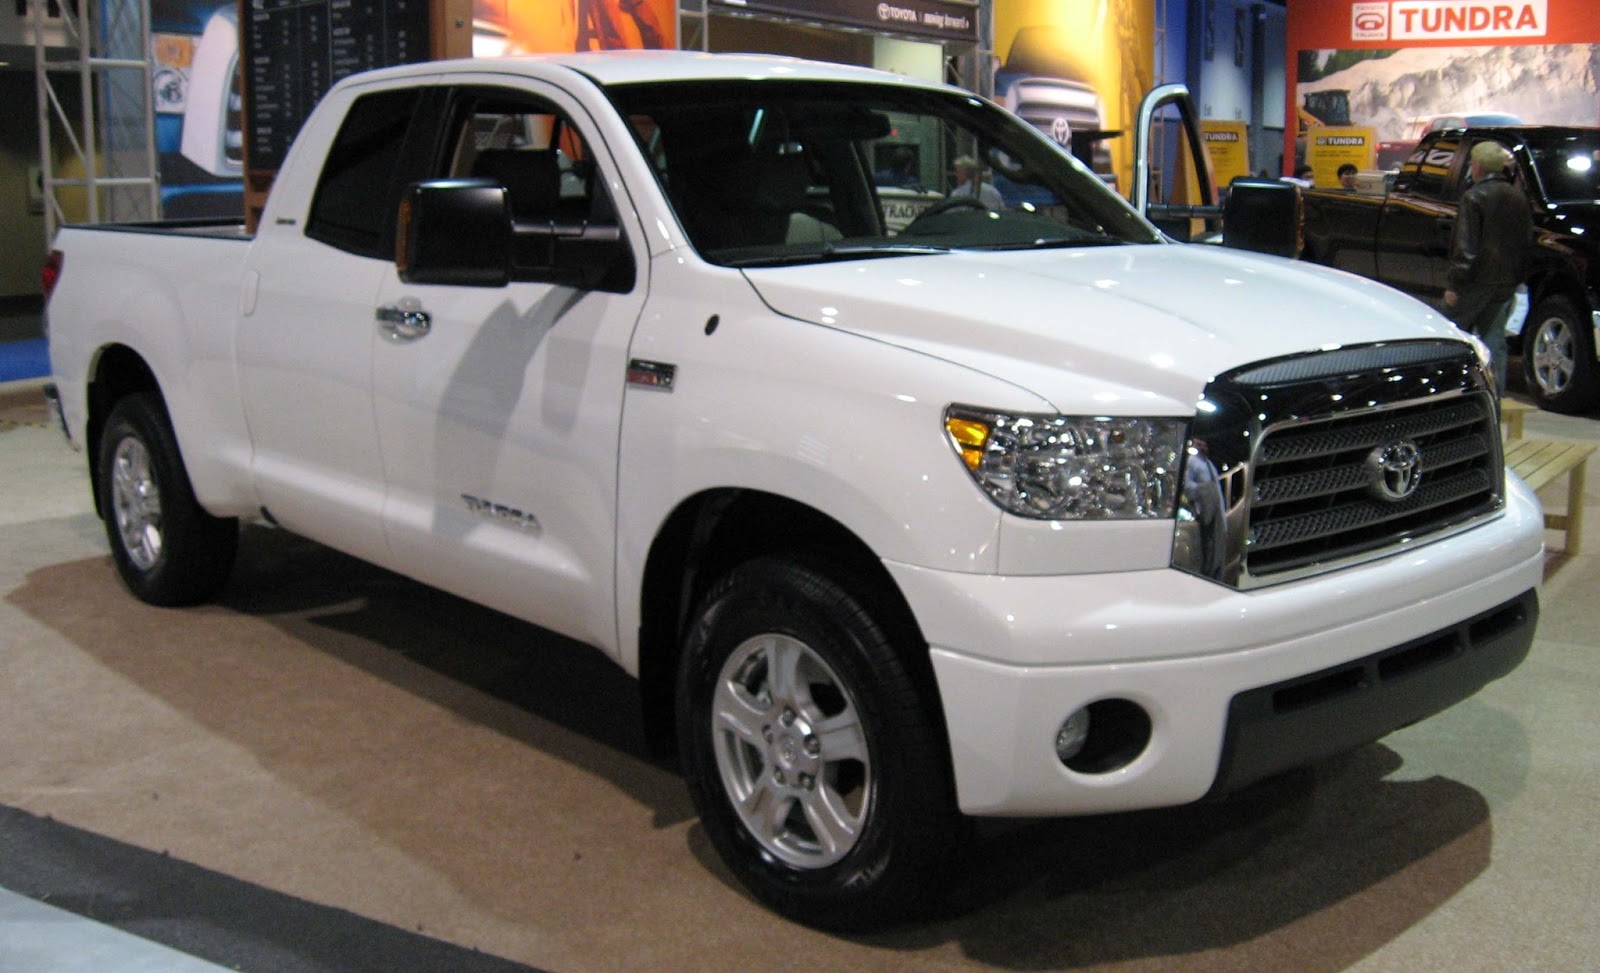 Toyota Tundra | Cars Games Today